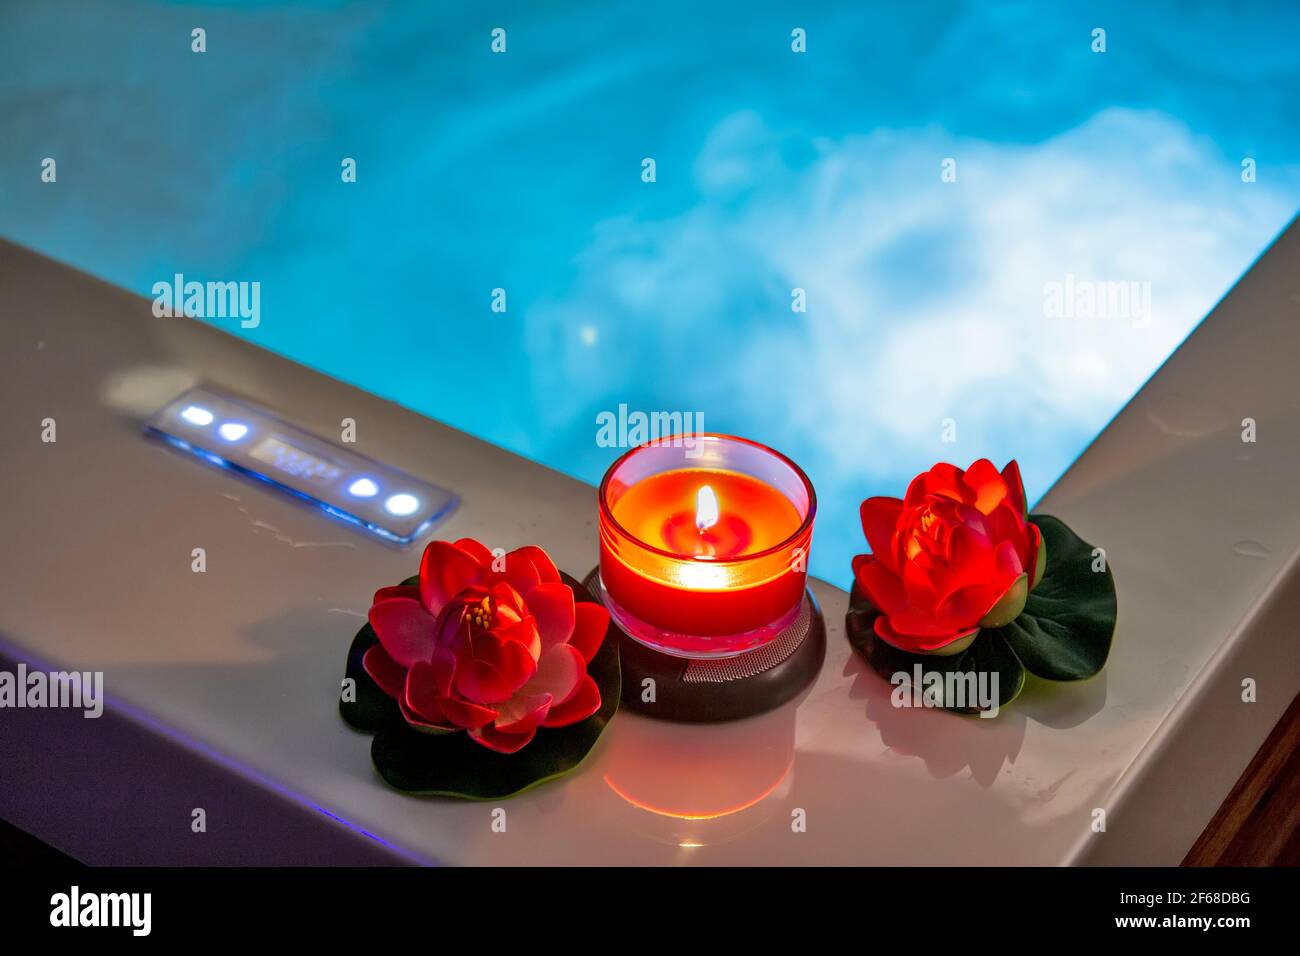 Jacuzzi Hot Tub Spa Bath Flowers Candles Stock Photo - Image of feel,  candles: 11054304